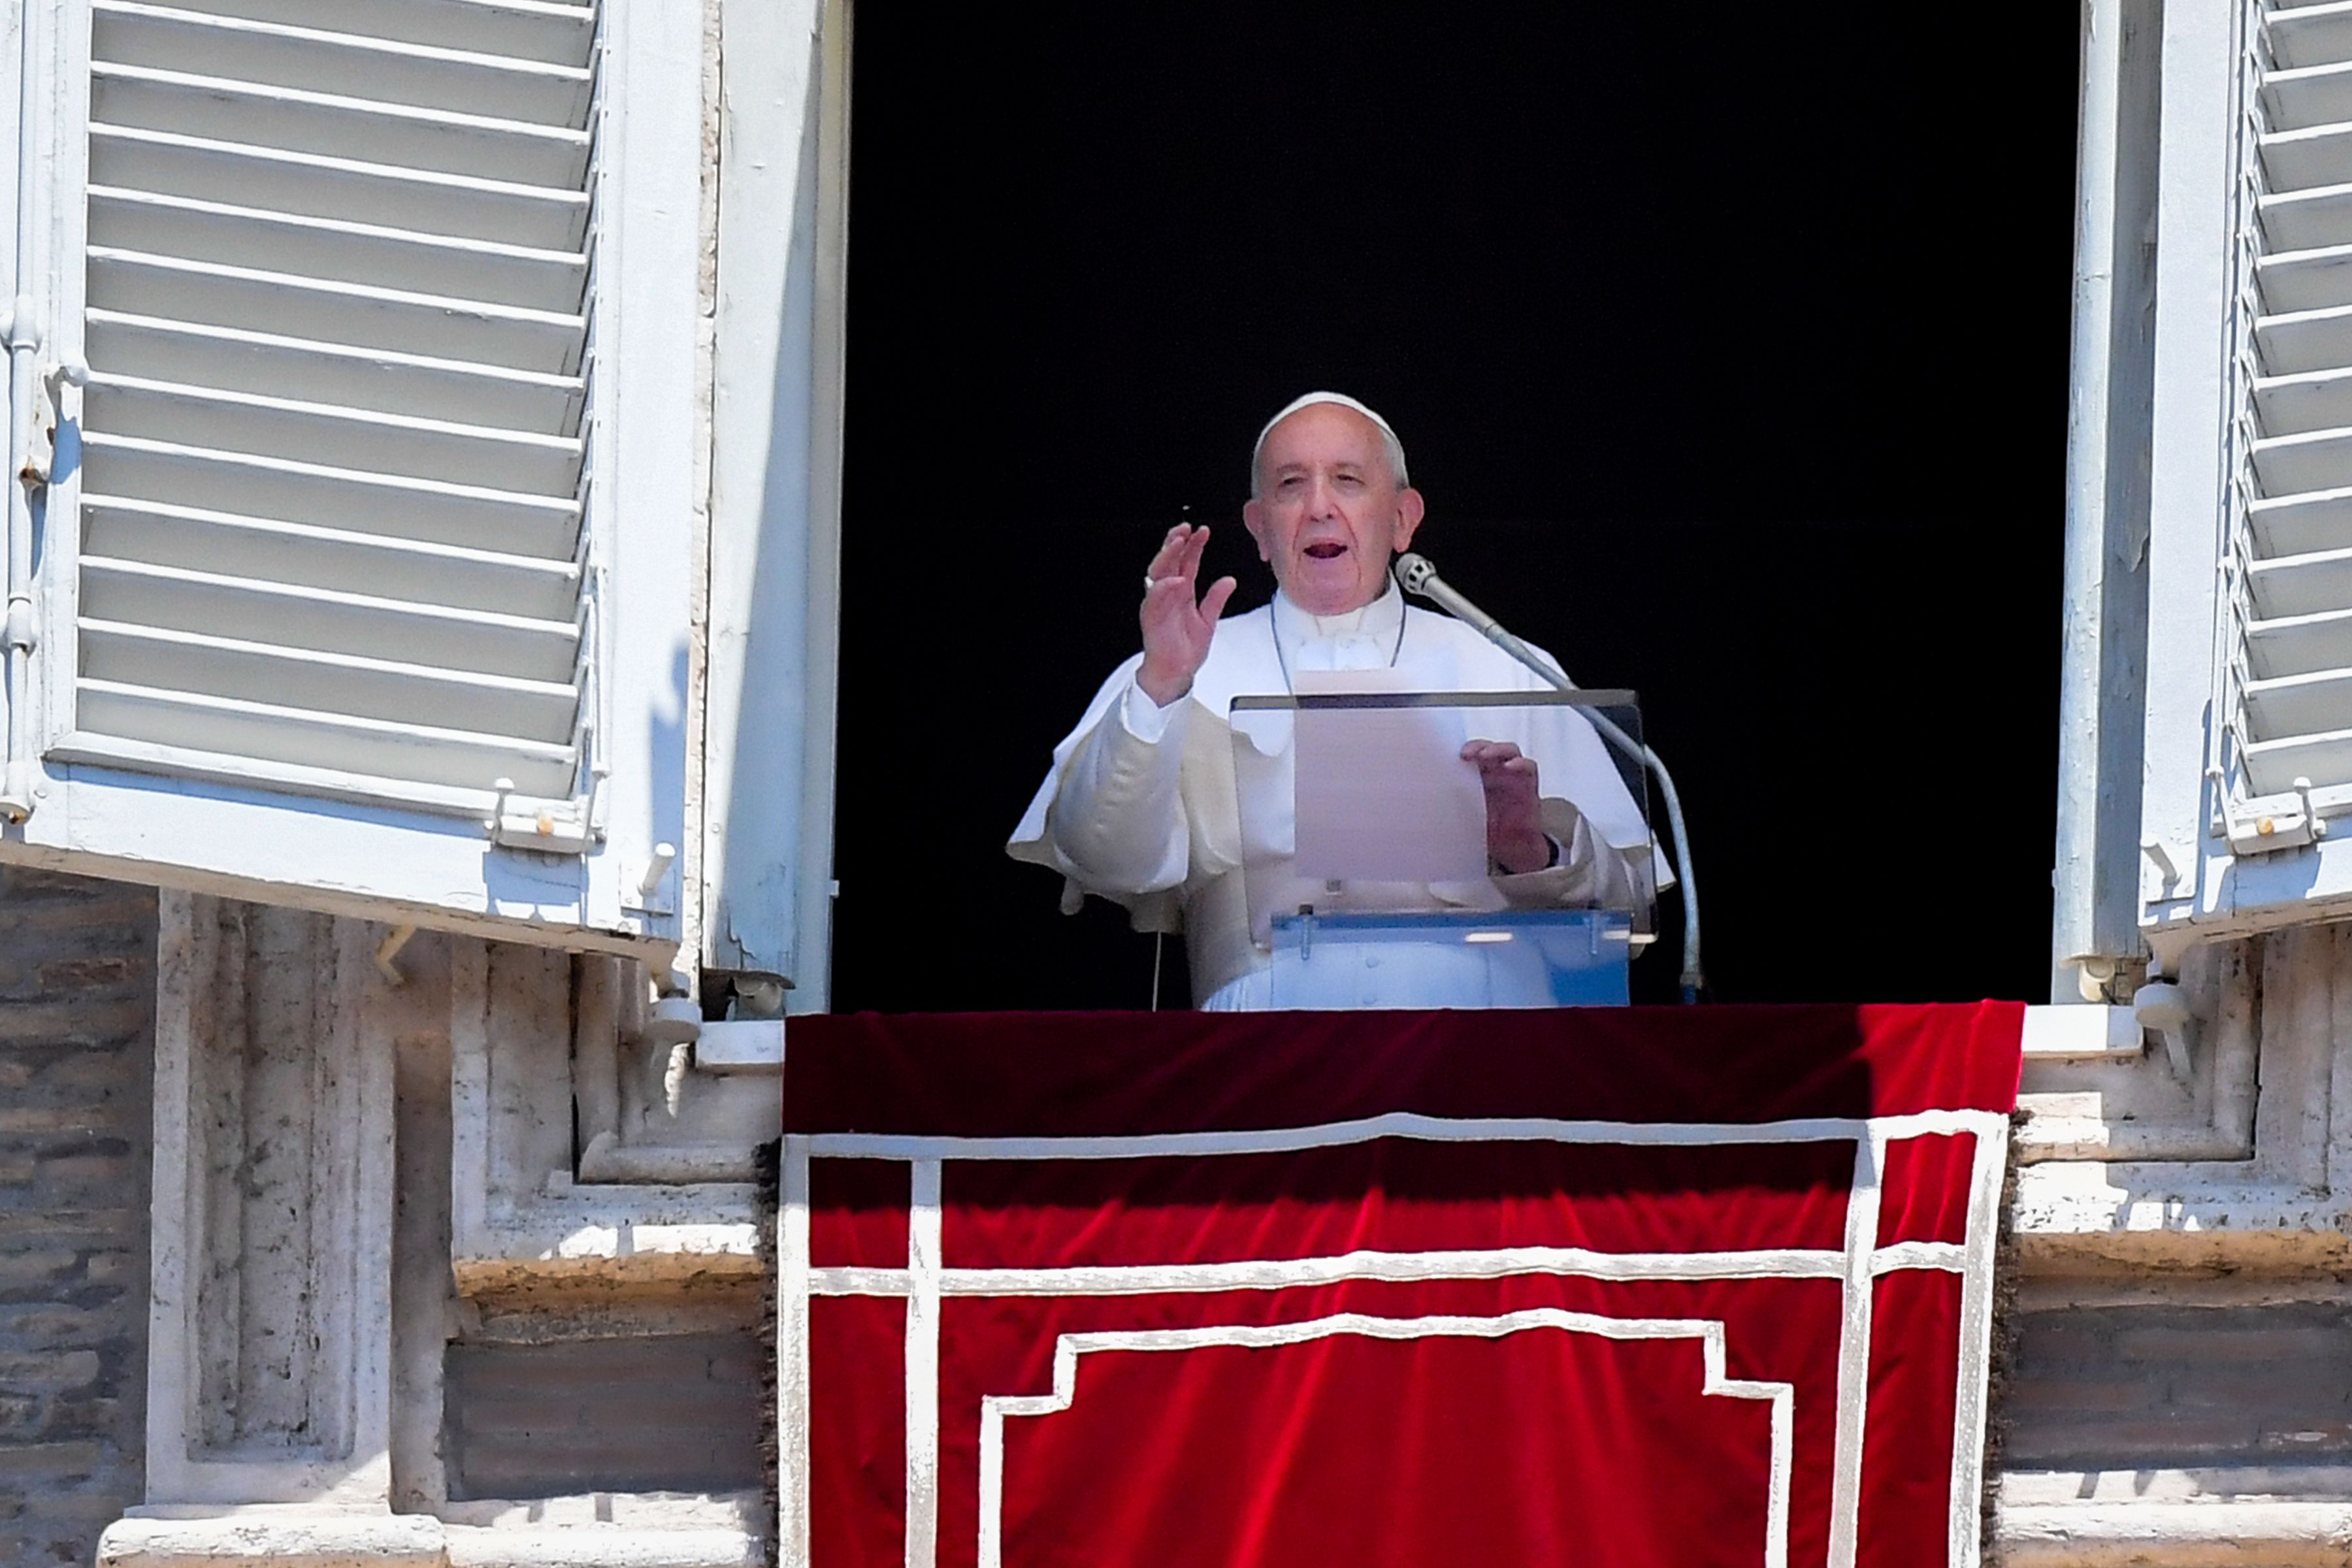 Pope Francis addresses worshipers Sunday from the window of the Apostolic Palace overlooking St. Peter's Square.